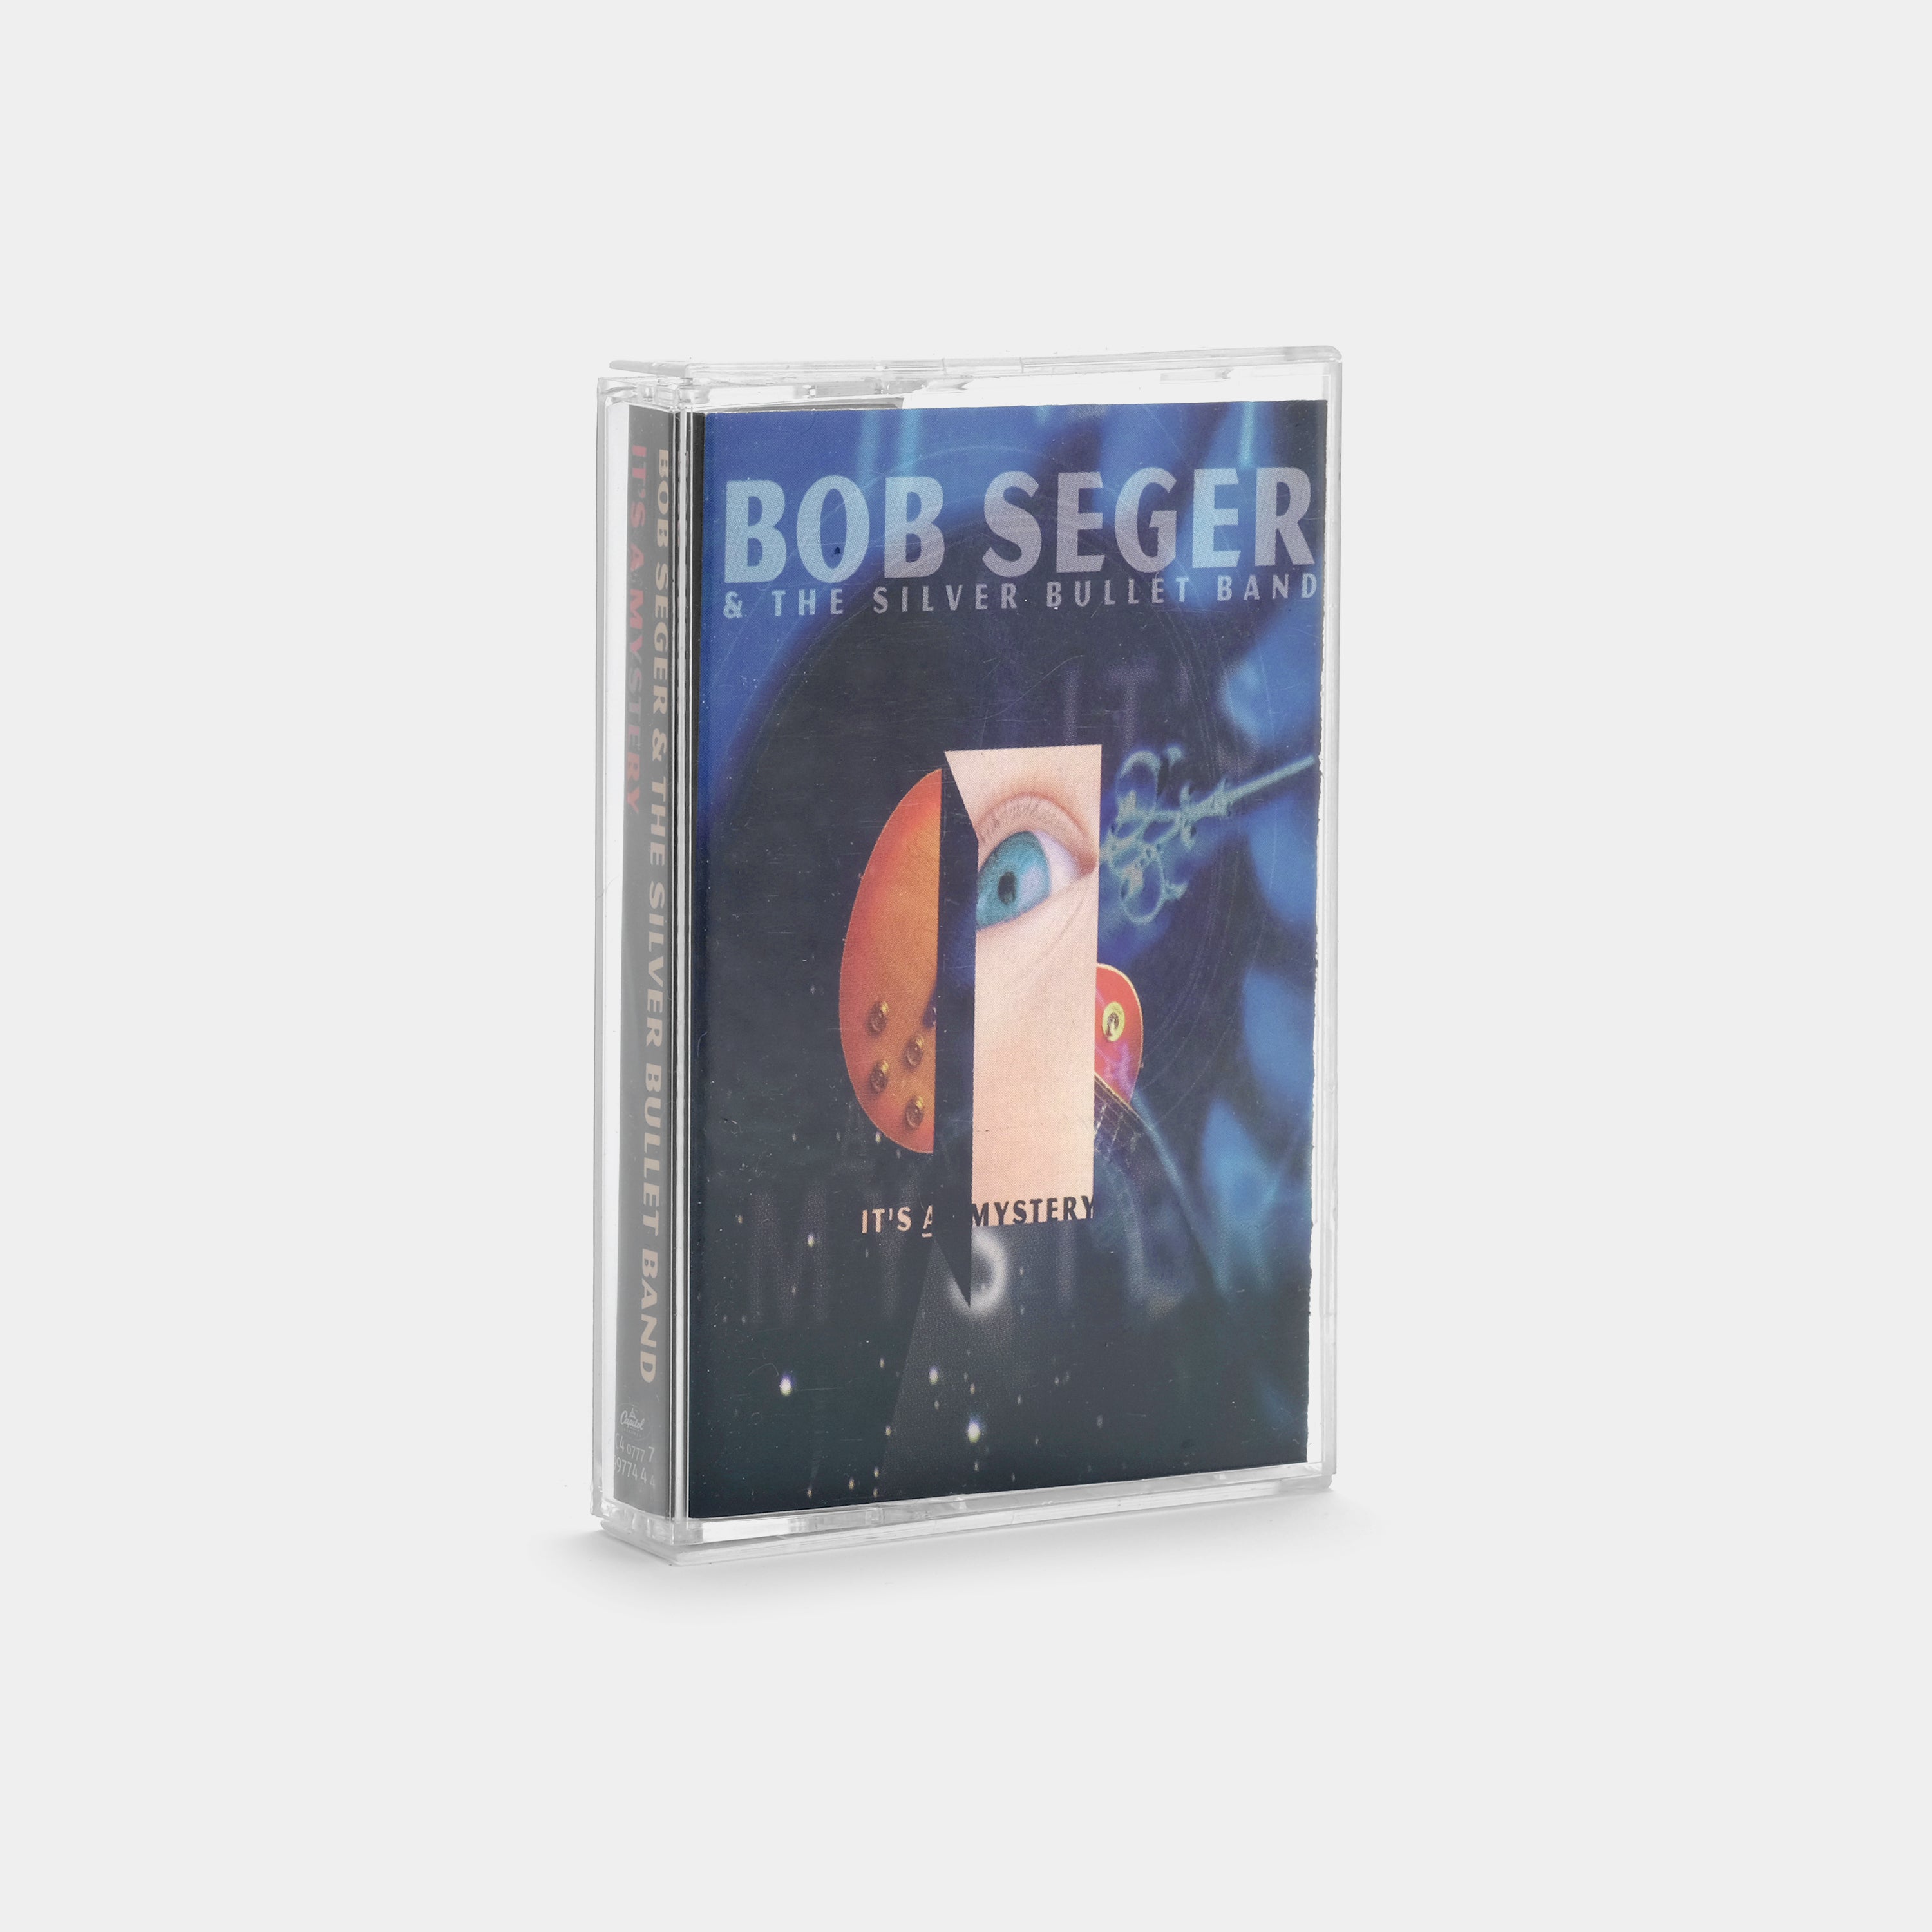 Bob Seger & The Silver Bullet Band - It's A Mystery Cassette Tape